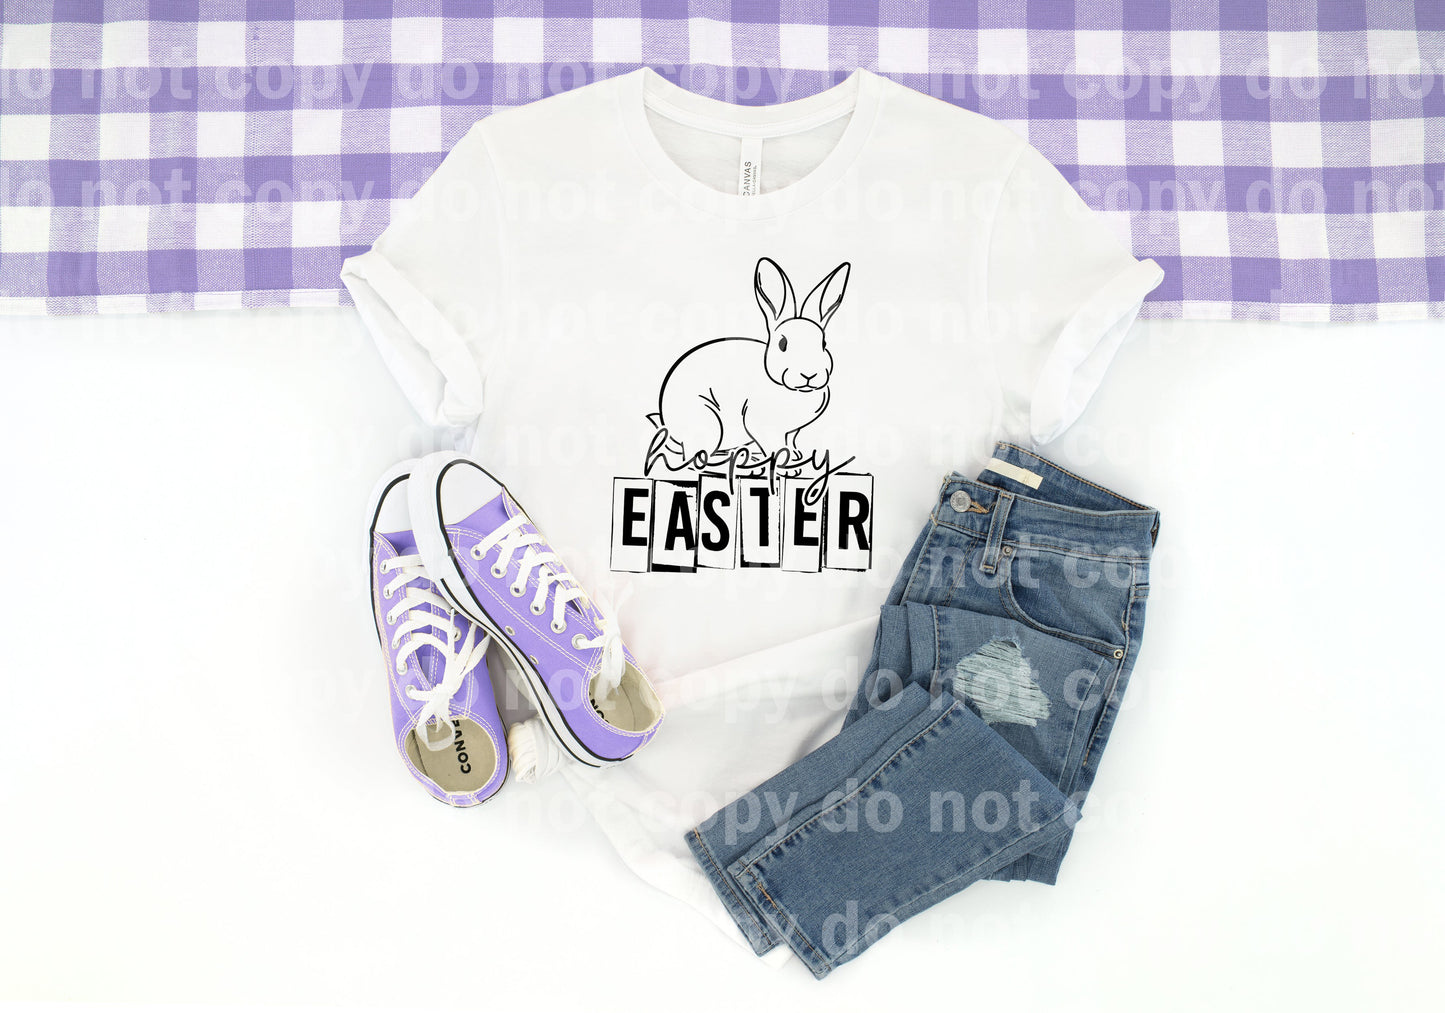 Hoppy Easter Bunny Full Color/One Color Dream Print or Sublimation Print